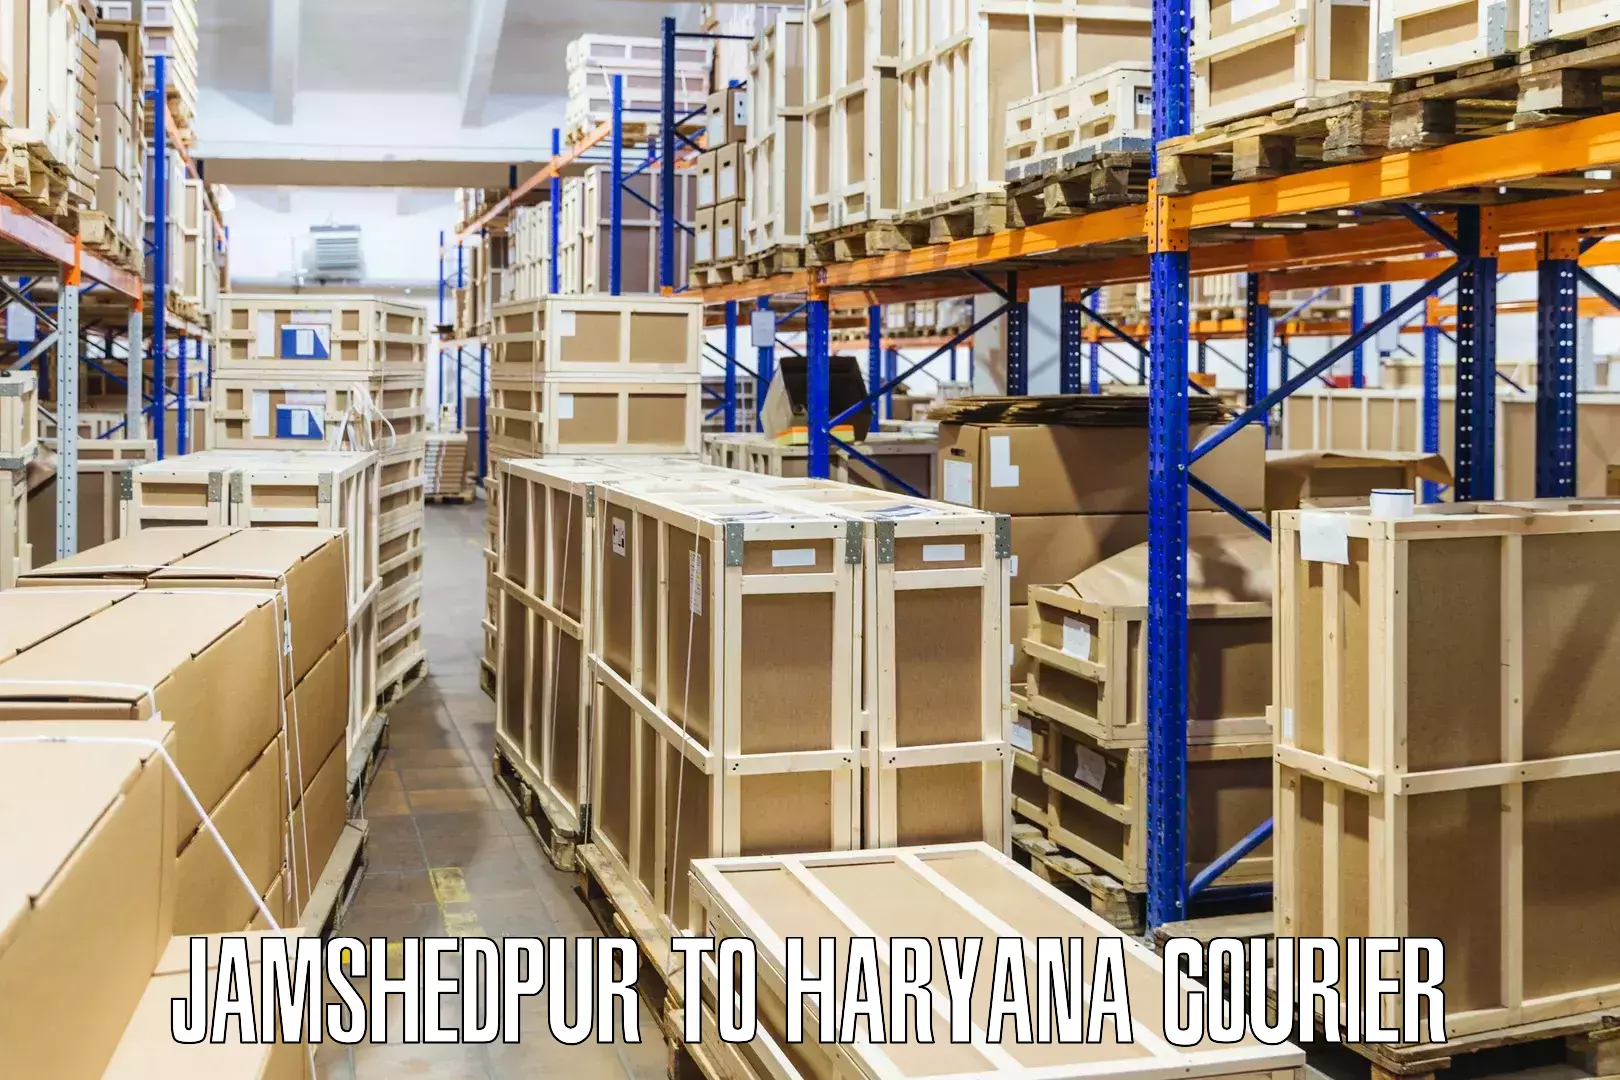 Efficient shipping operations Jamshedpur to Gurgaon